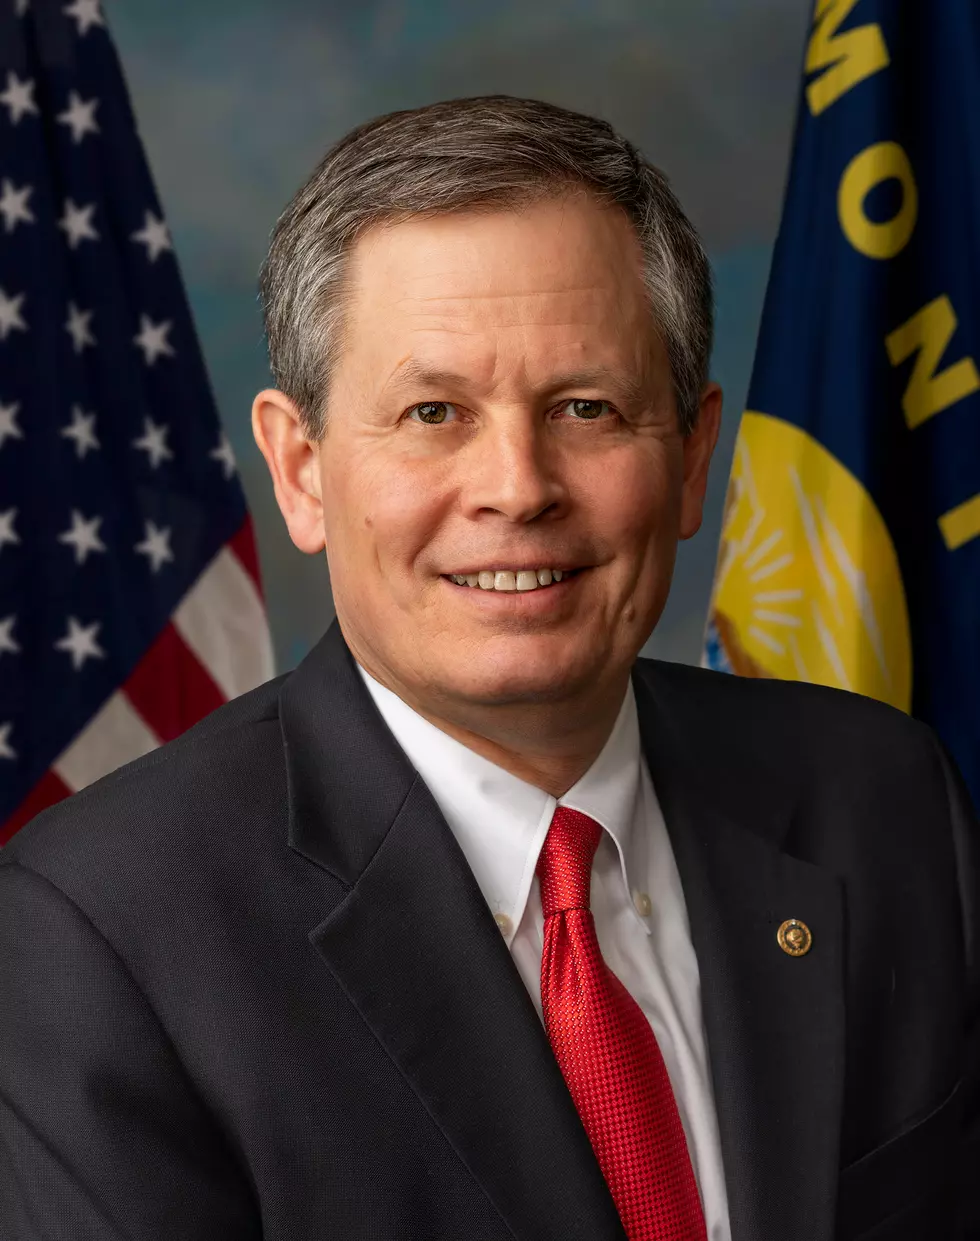 Senator Steve Daines visited with Pat & Randy on the KMON morning show